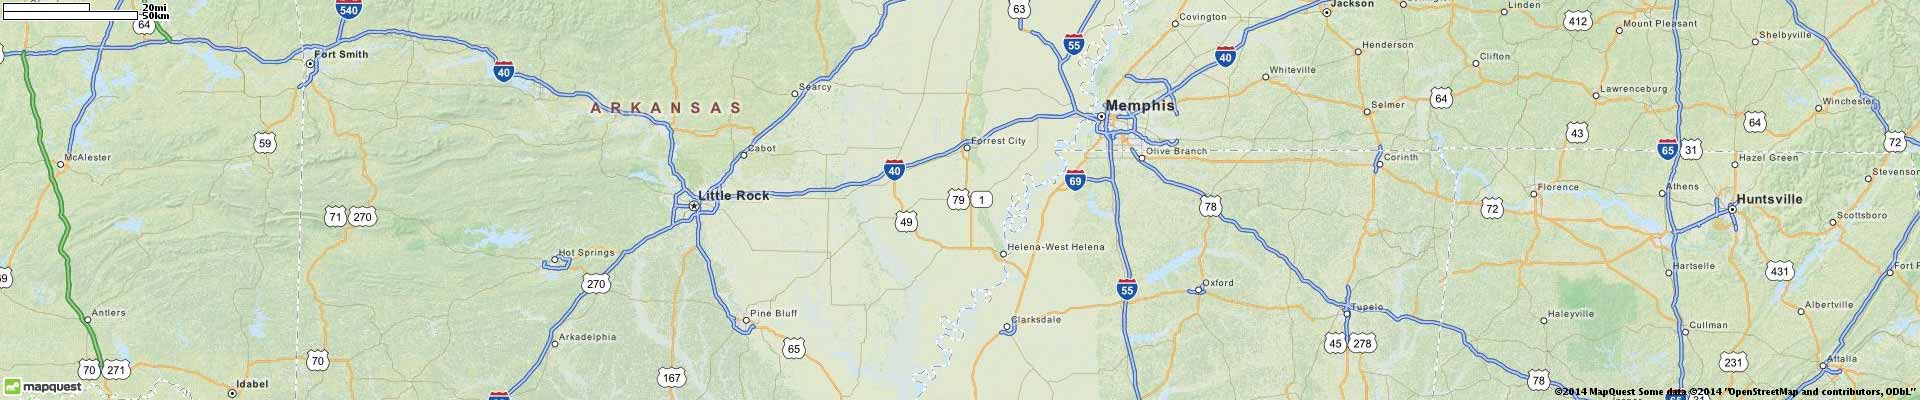 List of Cities in Lee County, Arkansas - Movoto